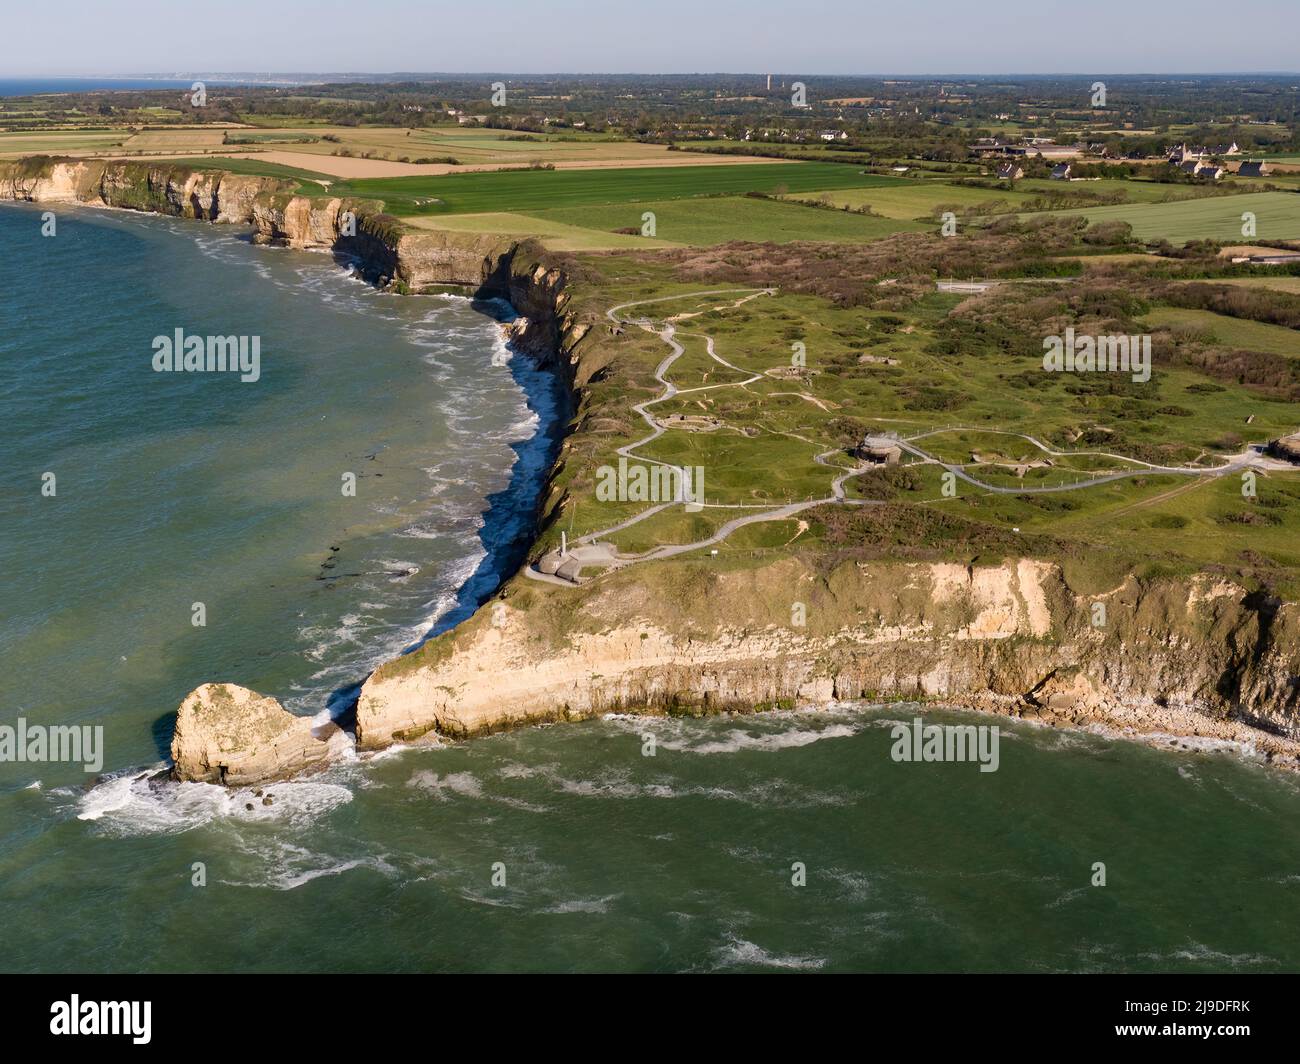 Photo of the pointe du Hoc - Historic site of the Normandy DDay during the WWII.  Stock Photo